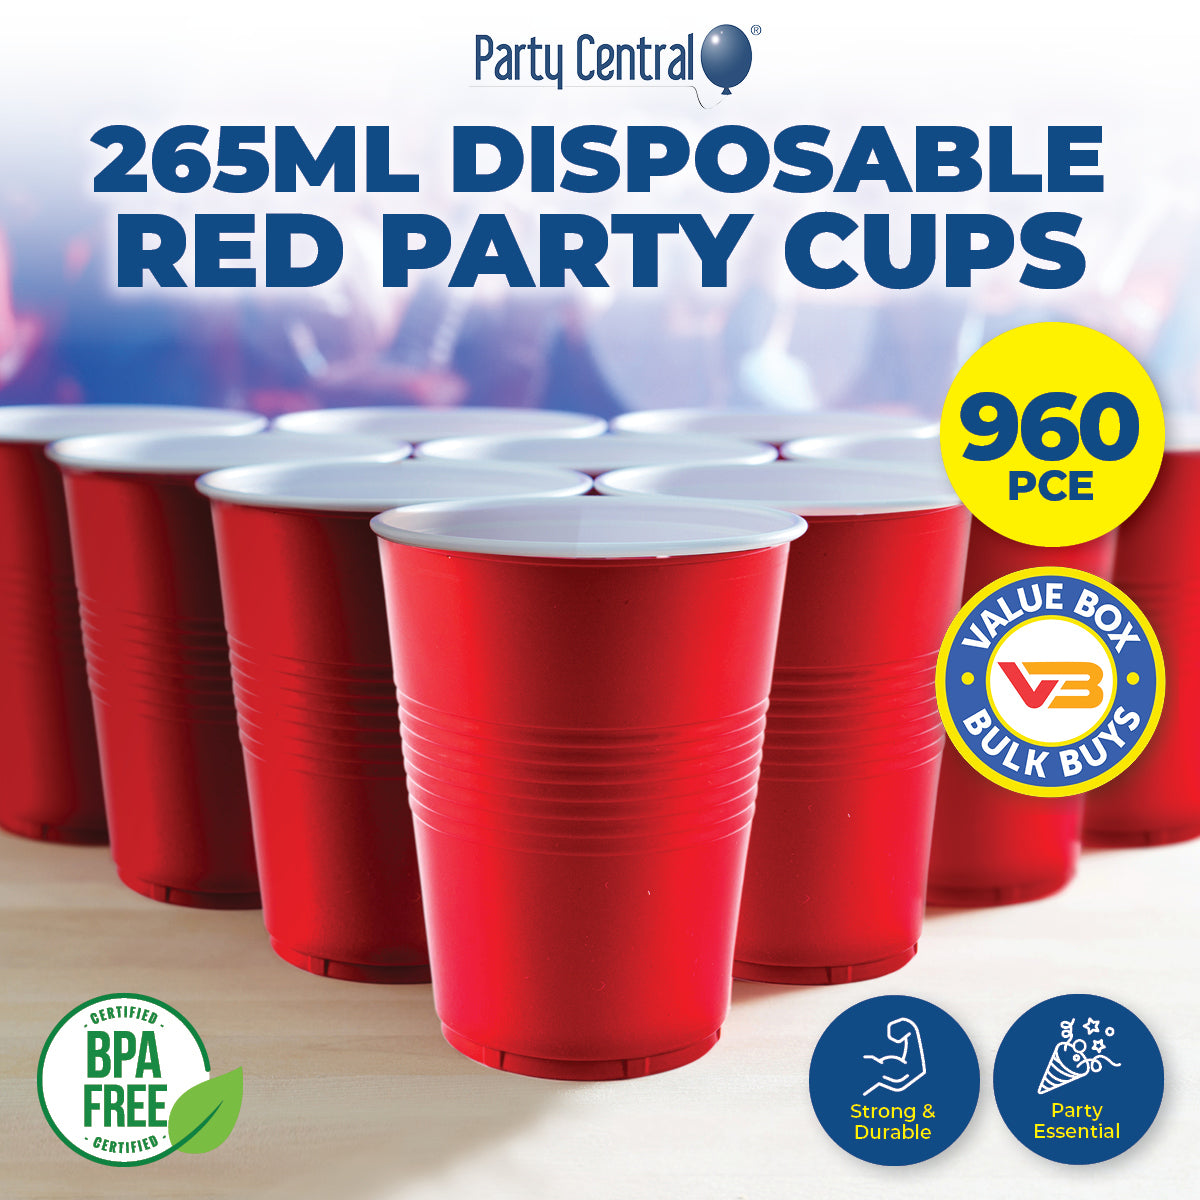 Party Central 960PCE Red Party Cups Disposable BPA Free High Quality 265ml